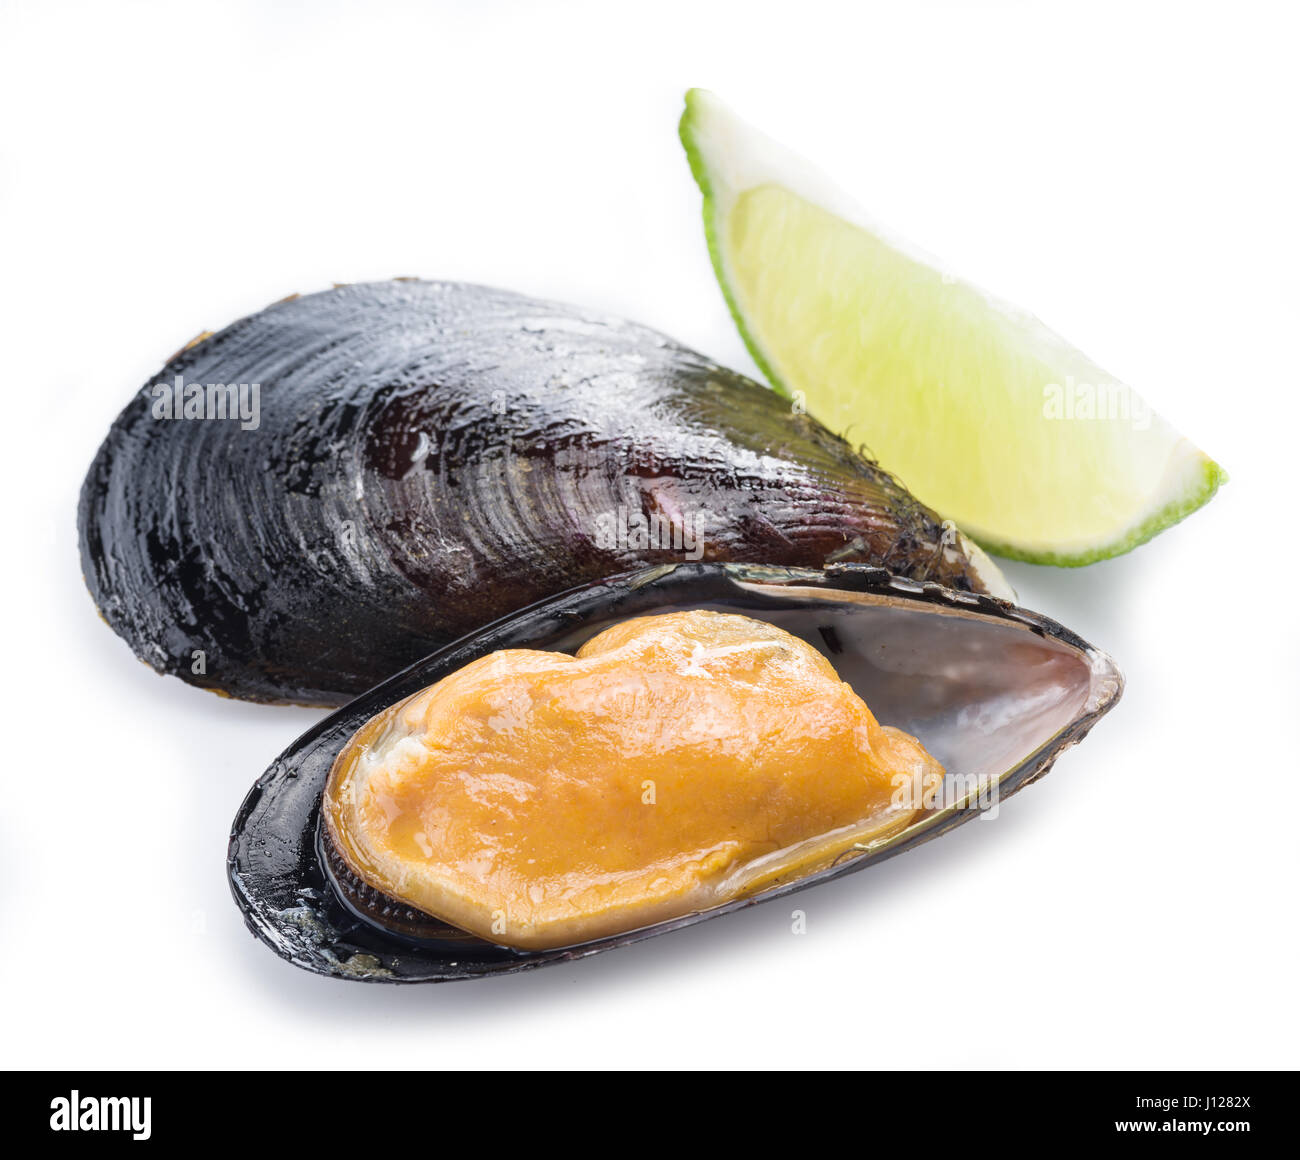 One boiled mussel on a white background. Stock Photo